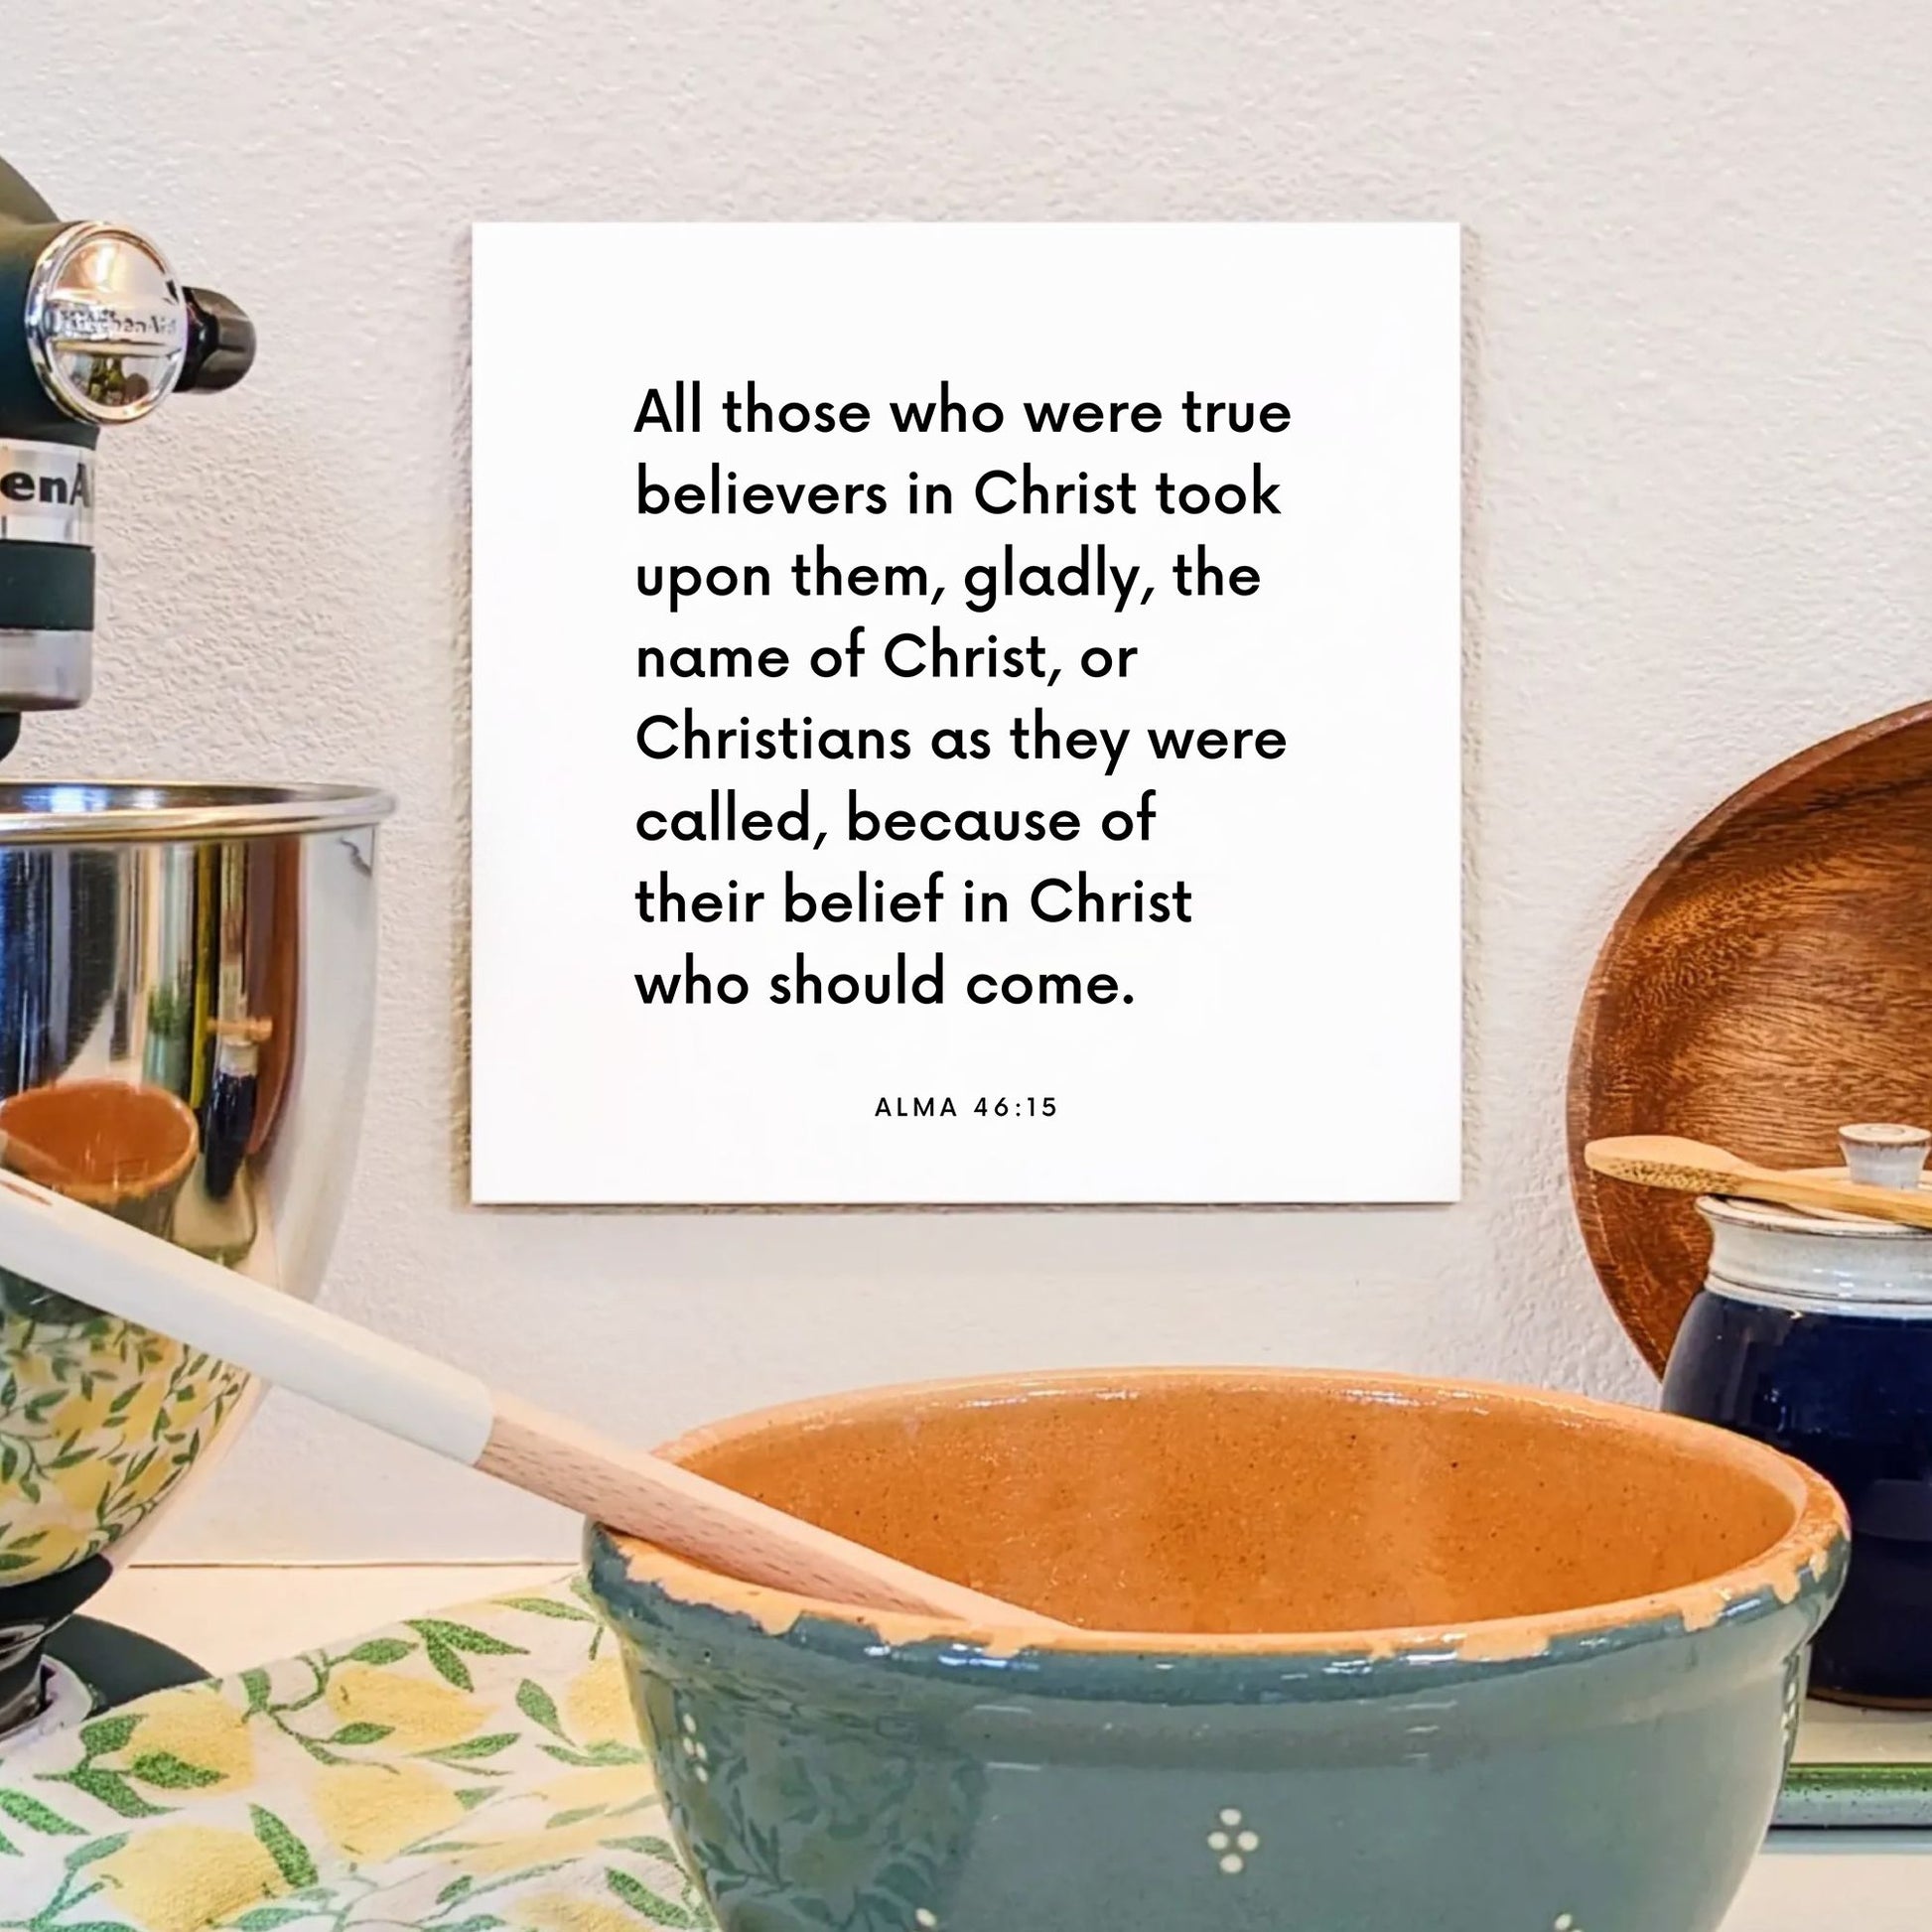 Kitchen mouting of the scripture tile for Alma 46:15 - "All those who were true believers in Christ"